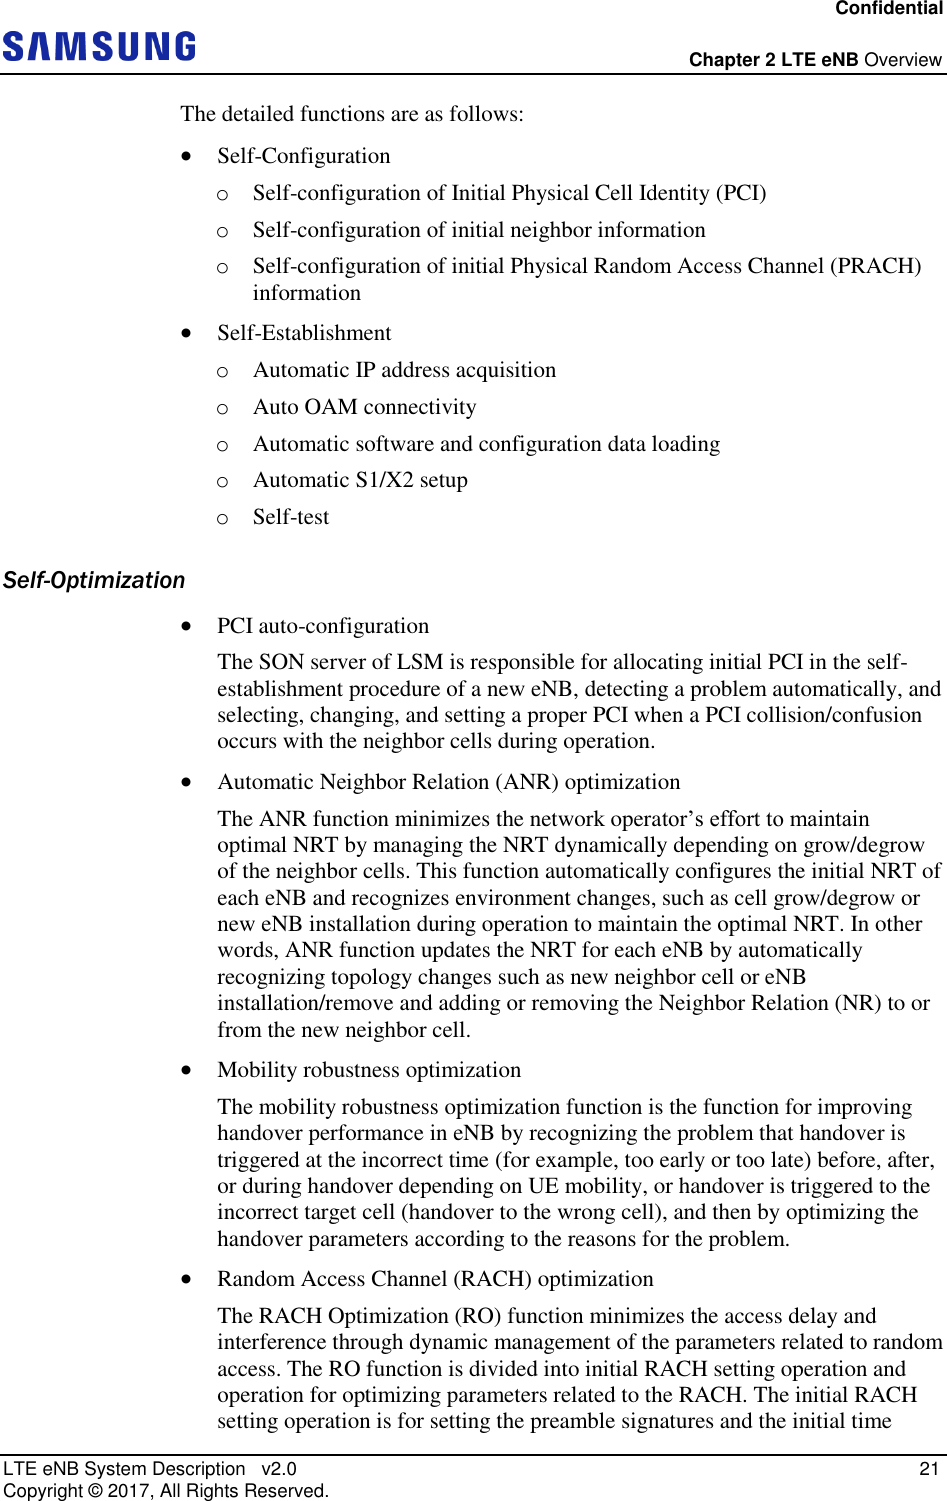 Confidential  Chapter 2 LTE eNB Overview LTE eNB System Description   v2.0   21 Copyright ©  2017, All Rights Reserved. The detailed functions are as follows:  Self-Configuration o Self-configuration of Initial Physical Cell Identity (PCI) o Self-configuration of initial neighbor information o Self-configuration of initial Physical Random Access Channel (PRACH) information  Self-Establishment o Automatic IP address acquisition o Auto OAM connectivity o Automatic software and configuration data loading o Automatic S1/X2 setup o Self-test Self-Optimization  PCI auto-configuration The SON server of LSM is responsible for allocating initial PCI in the self-establishment procedure of a new eNB, detecting a problem automatically, and selecting, changing, and setting a proper PCI when a PCI collision/confusion occurs with the neighbor cells during operation.  Automatic Neighbor Relation (ANR) optimization The ANR function minimizes the network operator’s effort to maintain optimal NRT by managing the NRT dynamically depending on grow/degrow of the neighbor cells. This function automatically configures the initial NRT of each eNB and recognizes environment changes, such as cell grow/degrow or new eNB installation during operation to maintain the optimal NRT. In other words, ANR function updates the NRT for each eNB by automatically recognizing topology changes such as new neighbor cell or eNB installation/remove and adding or removing the Neighbor Relation (NR) to or from the new neighbor cell.  Mobility robustness optimization The mobility robustness optimization function is the function for improving handover performance in eNB by recognizing the problem that handover is triggered at the incorrect time (for example, too early or too late) before, after, or during handover depending on UE mobility, or handover is triggered to the incorrect target cell (handover to the wrong cell), and then by optimizing the handover parameters according to the reasons for the problem.  Random Access Channel (RACH) optimization The RACH Optimization (RO) function minimizes the access delay and interference through dynamic management of the parameters related to random access. The RO function is divided into initial RACH setting operation and operation for optimizing parameters related to the RACH. The initial RACH setting operation is for setting the preamble signatures and the initial time 